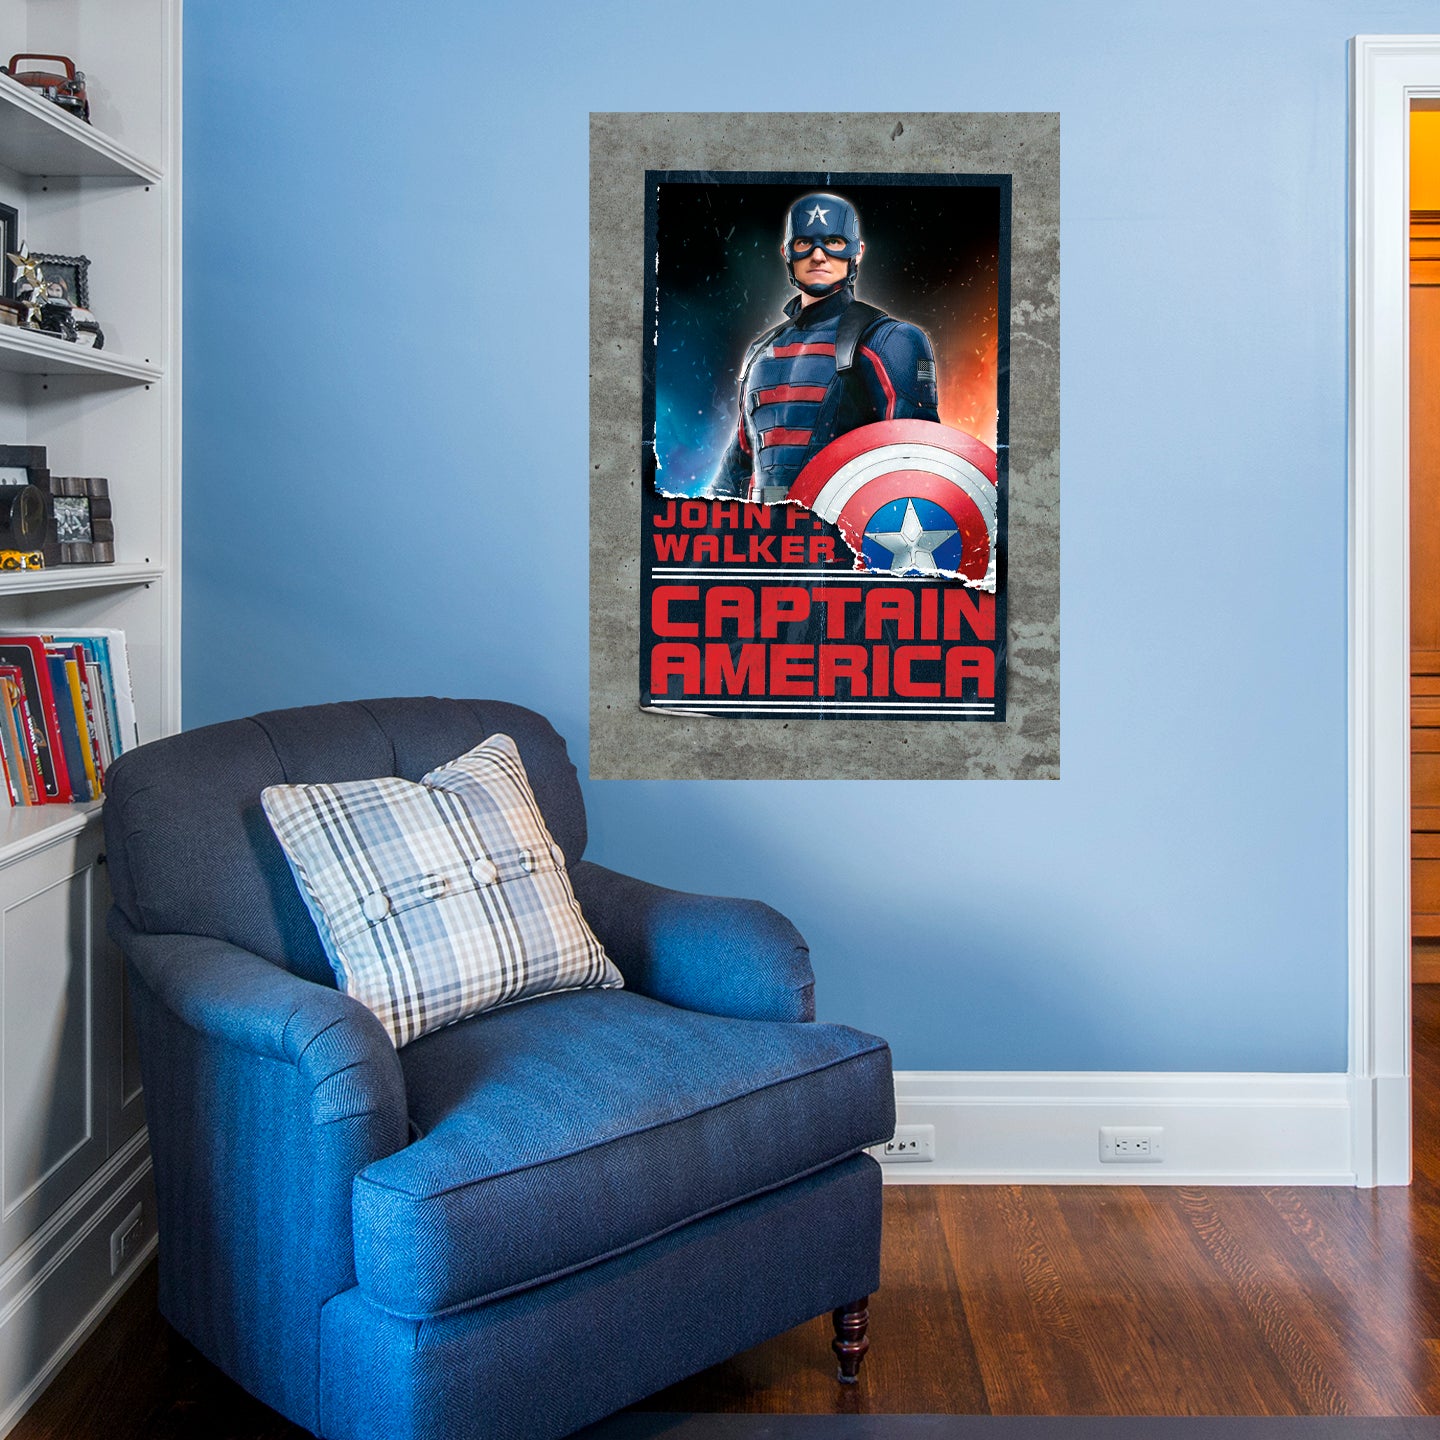 The Falcon & The Winter Soldier: John F Walker Mural        - Officially Licensed Marvel Removable Wall   Adhesive Decal